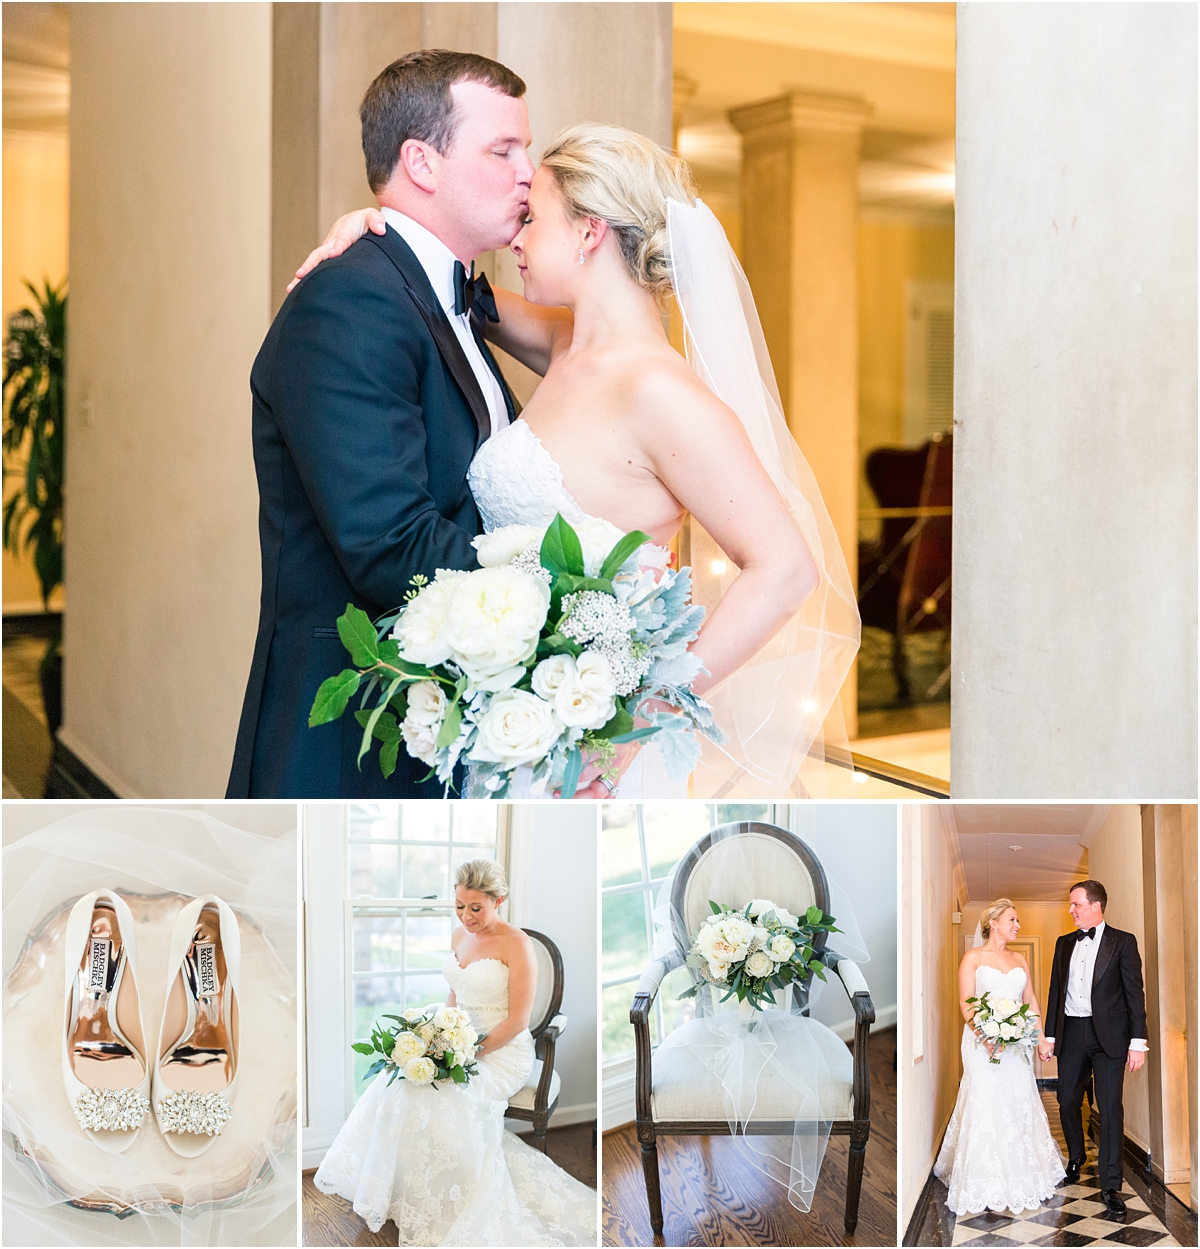 Baltimore Country Club wedding day photographed by Baltimore MD wedding photographer Alexandra Mandato Photography